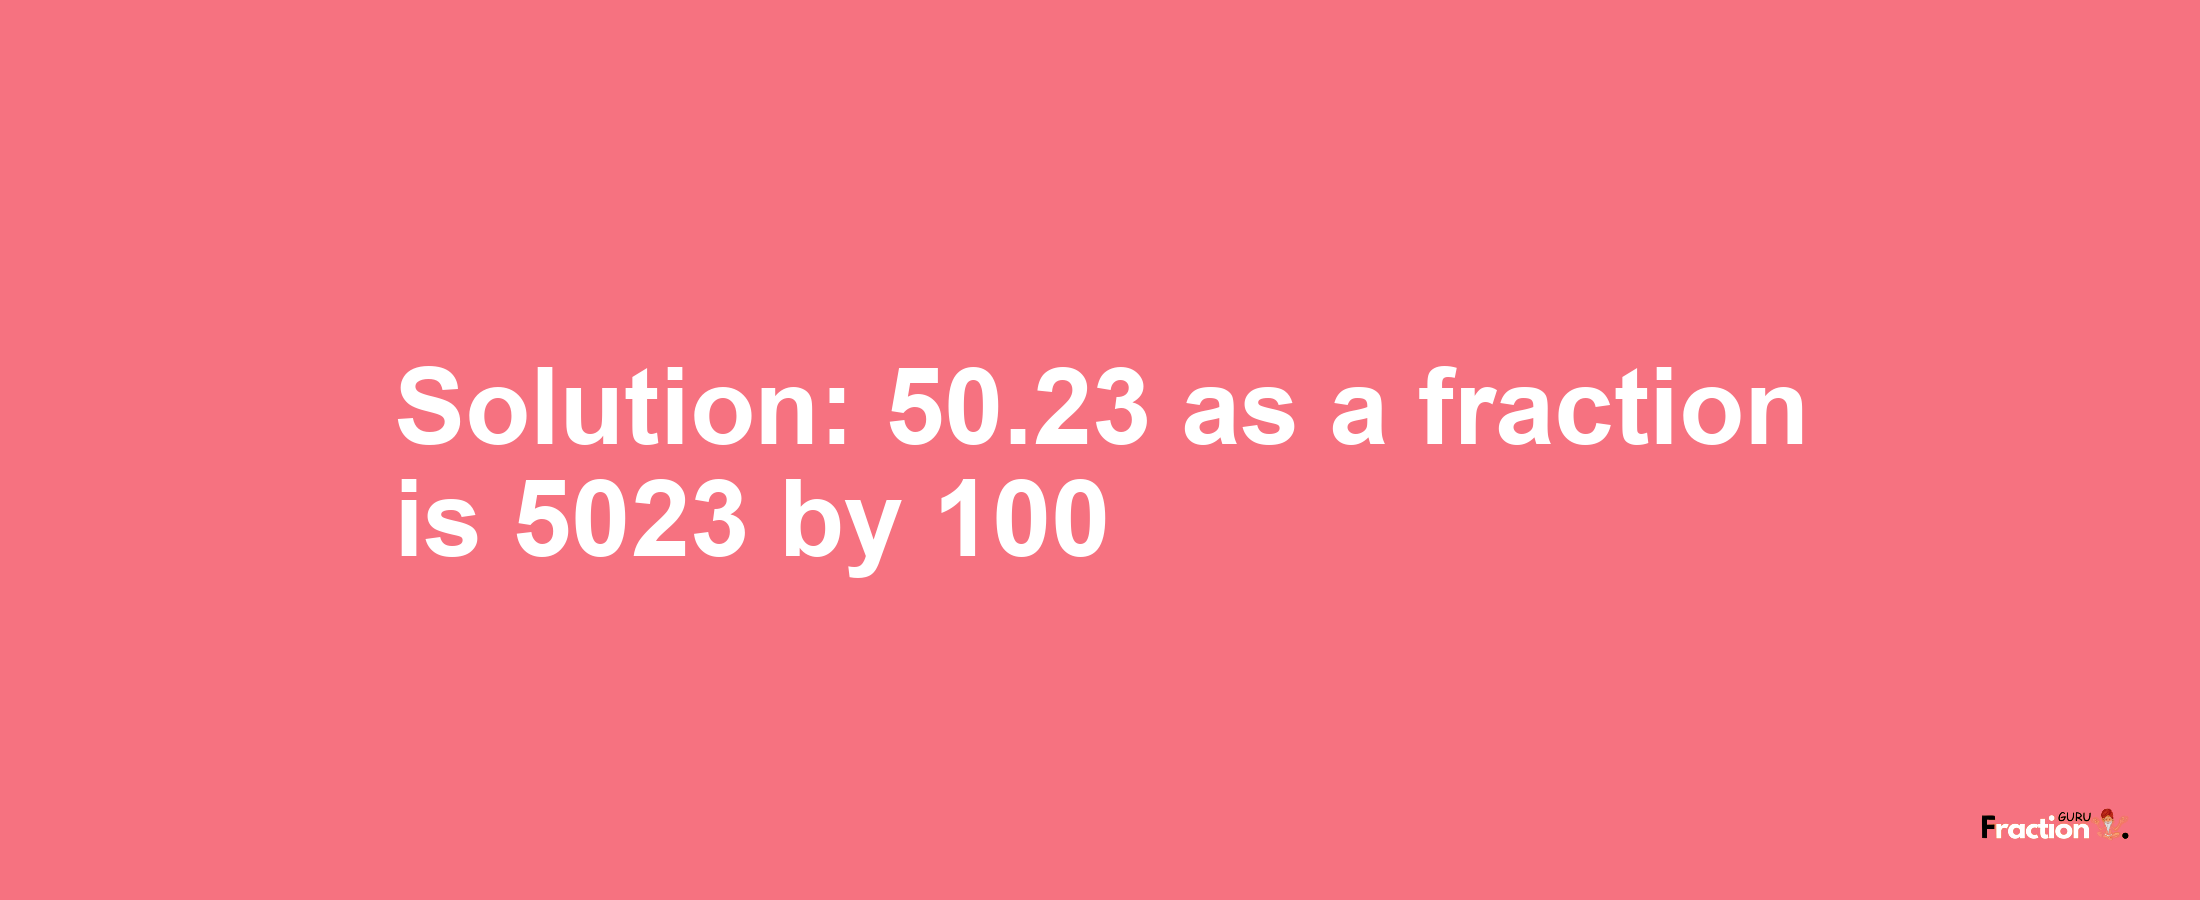 Solution:50.23 as a fraction is 5023/100